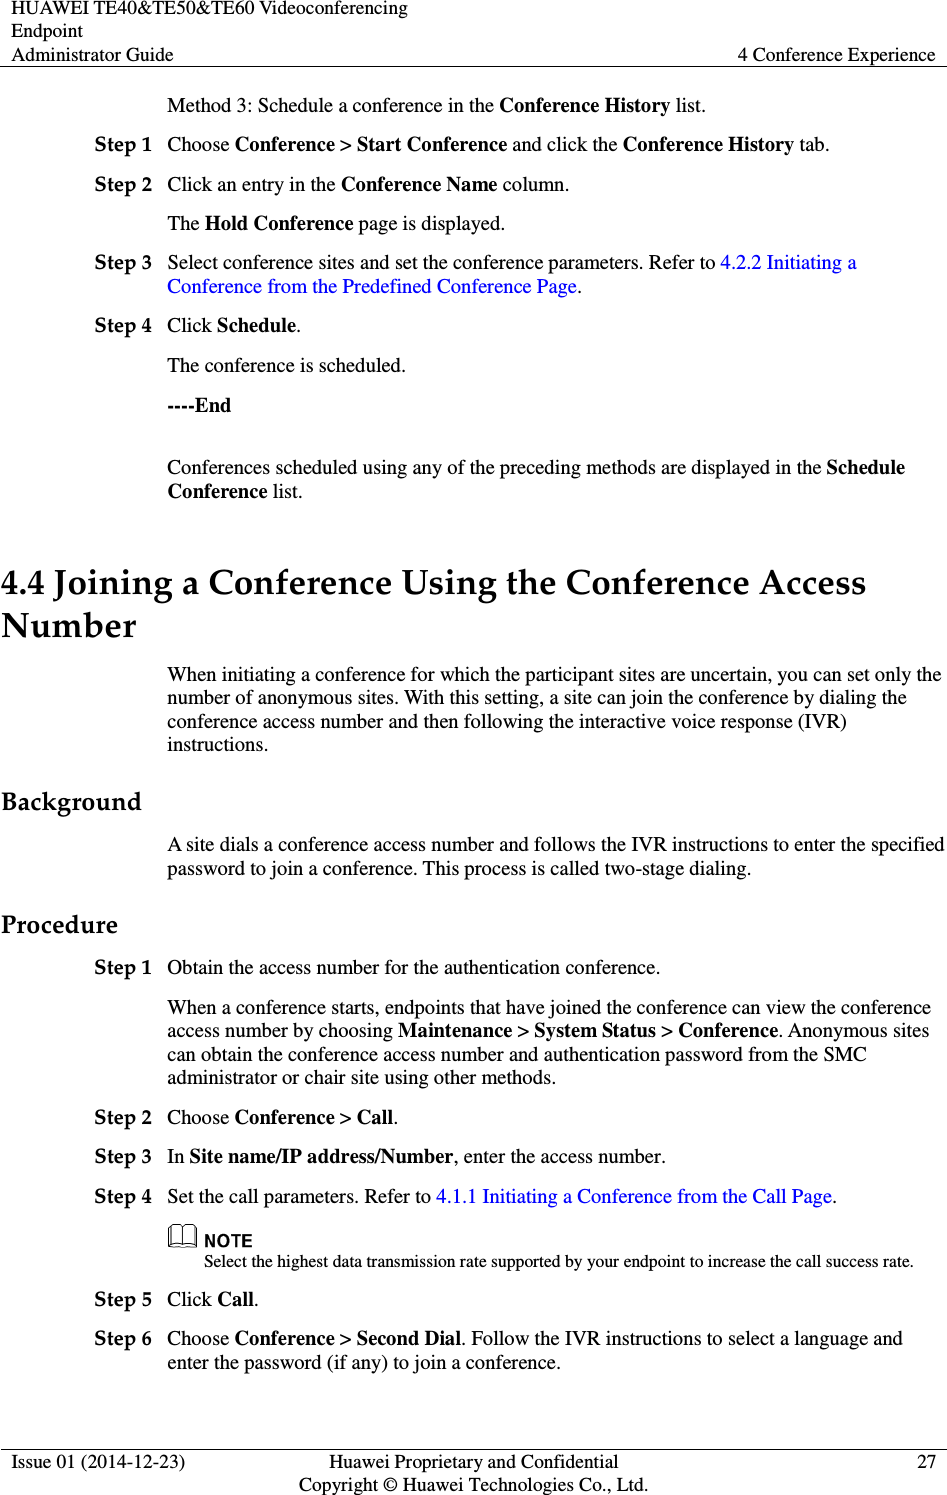 HUAWEI TE40&amp;TE50&amp;TE60 Videoconferencing Endpoint Administrator Guide  4 Conference Experience  Issue 01 (2014-12-23)  Huawei Proprietary and Confidential                                     Copyright © Huawei Technologies Co., Ltd. 27  Method 3: Schedule a conference in the Conference History list. Step 1 Choose Conference &gt; Start Conference and click the Conference History tab.   Step 2 Click an entry in the Conference Name column. The Hold Conference page is displayed. Step 3 Select conference sites and set the conference parameters. Refer to 4.2.2 Initiating a Conference from the Predefined Conference Page. Step 4 Click Schedule. The conference is scheduled. ----End Conferences scheduled using any of the preceding methods are displayed in the Schedule Conference list. 4.4 Joining a Conference Using the Conference Access Number When initiating a conference for which the participant sites are uncertain, you can set only the number of anonymous sites. With this setting, a site can join the conference by dialing the conference access number and then following the interactive voice response (IVR) instructions.   Background A site dials a conference access number and follows the IVR instructions to enter the specified password to join a conference. This process is called two-stage dialing. Procedure Step 1 Obtain the access number for the authentication conference. When a conference starts, endpoints that have joined the conference can view the conference access number by choosing Maintenance &gt; System Status &gt; Conference. Anonymous sites can obtain the conference access number and authentication password from the SMC administrator or chair site using other methods. Step 2 Choose Conference &gt; Call. Step 3 In Site name/IP address/Number, enter the access number. Step 4 Set the call parameters. Refer to 4.1.1 Initiating a Conference from the Call Page.  Select the highest data transmission rate supported by your endpoint to increase the call success rate. Step 5 Click Call. Step 6 Choose Conference &gt; Second Dial. Follow the IVR instructions to select a language and enter the password (if any) to join a conference. 